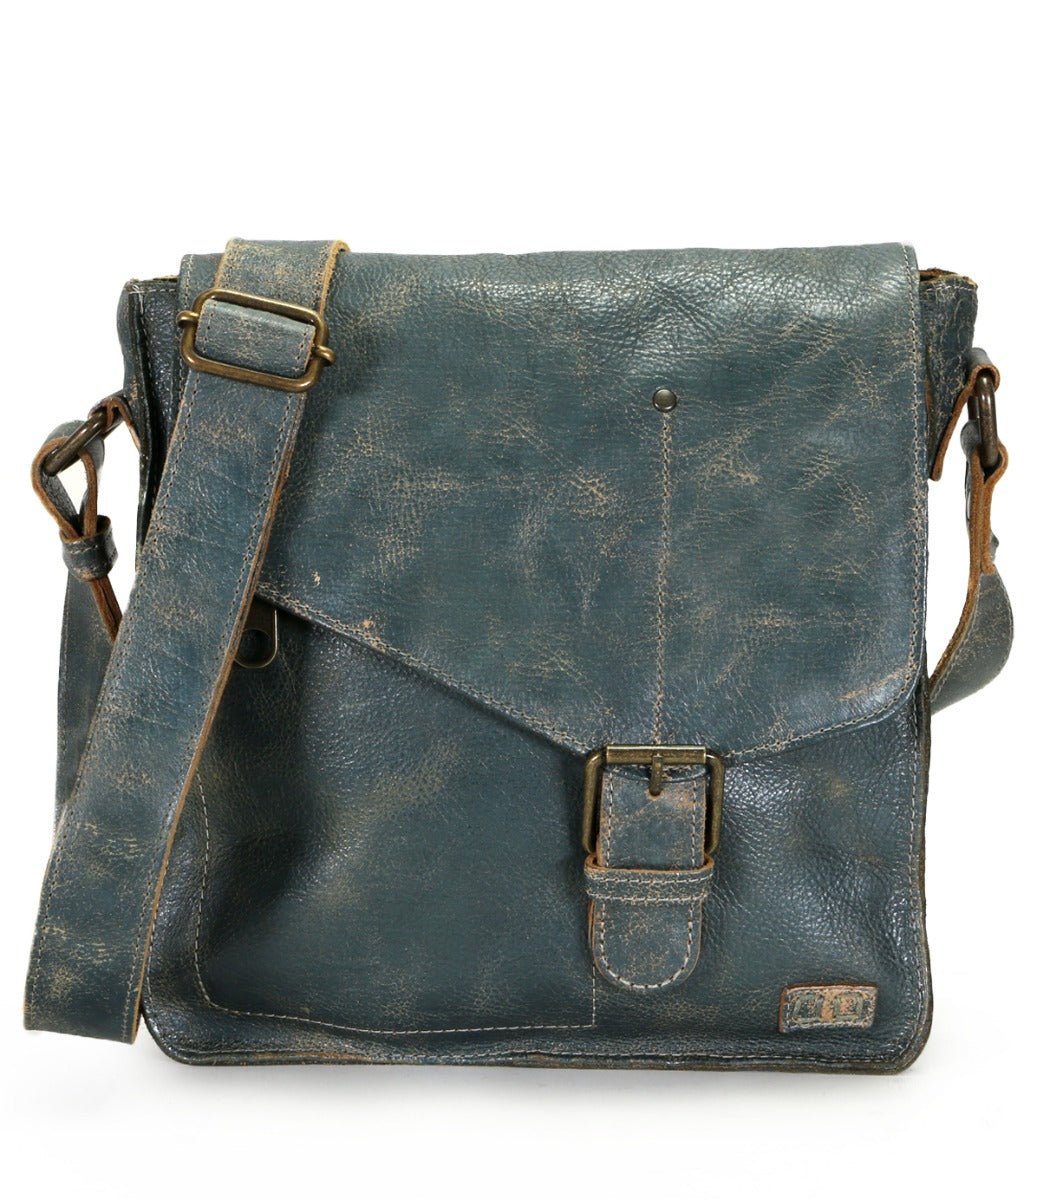 A teal Venice Beach leather messenger bag with an adjustable strap by Bed Stu.